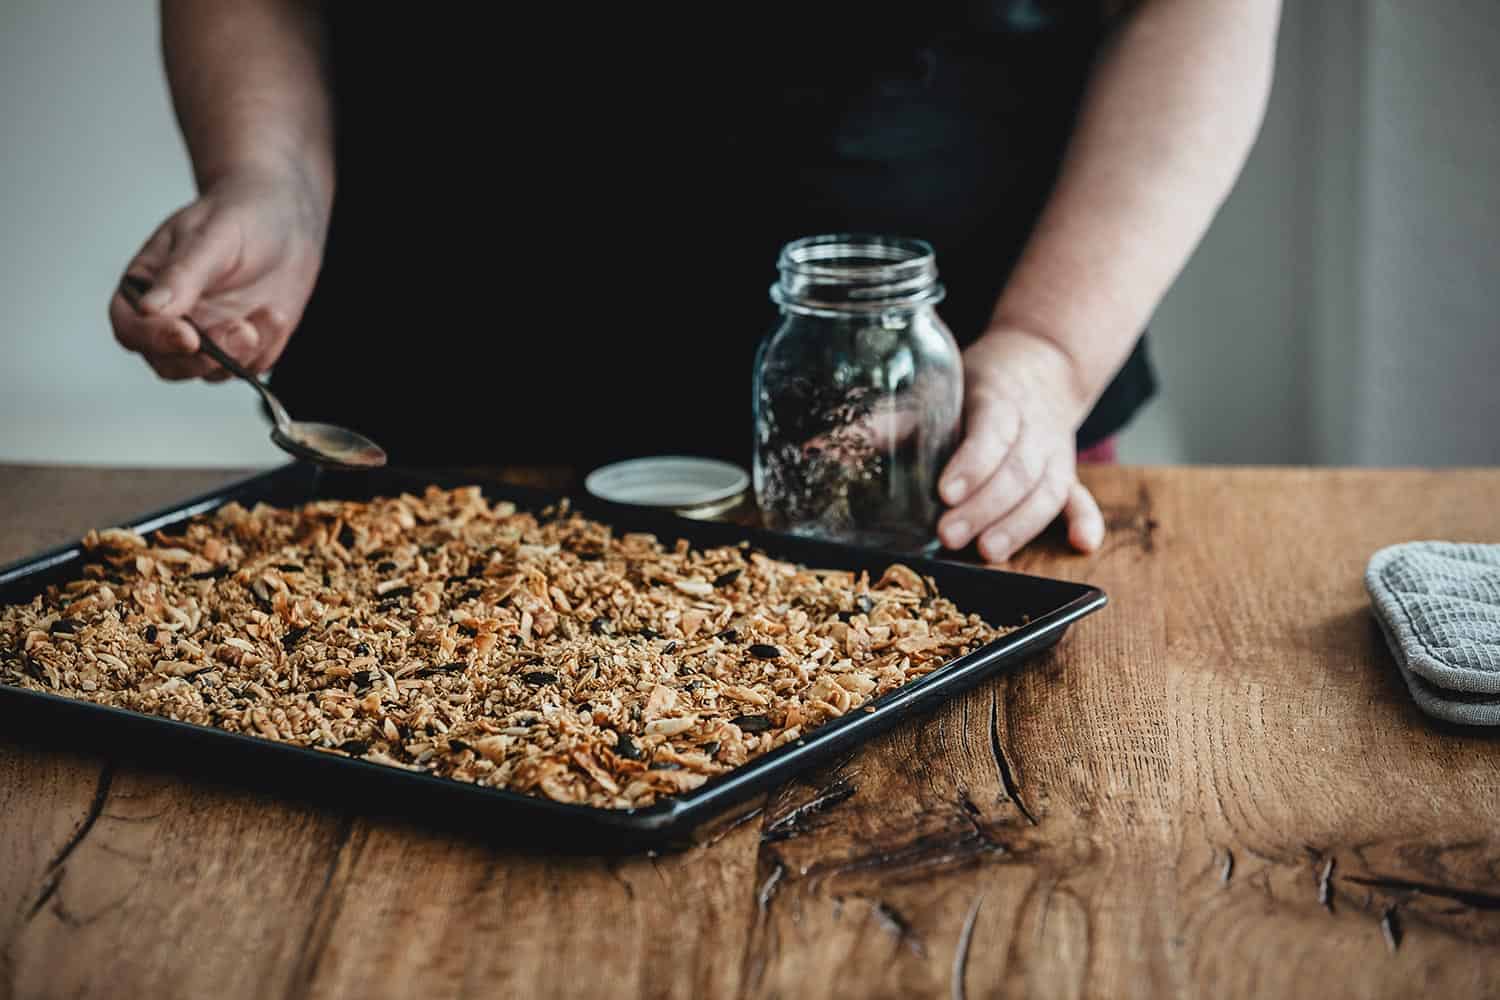 Woman filling a glass jar with homemade granola